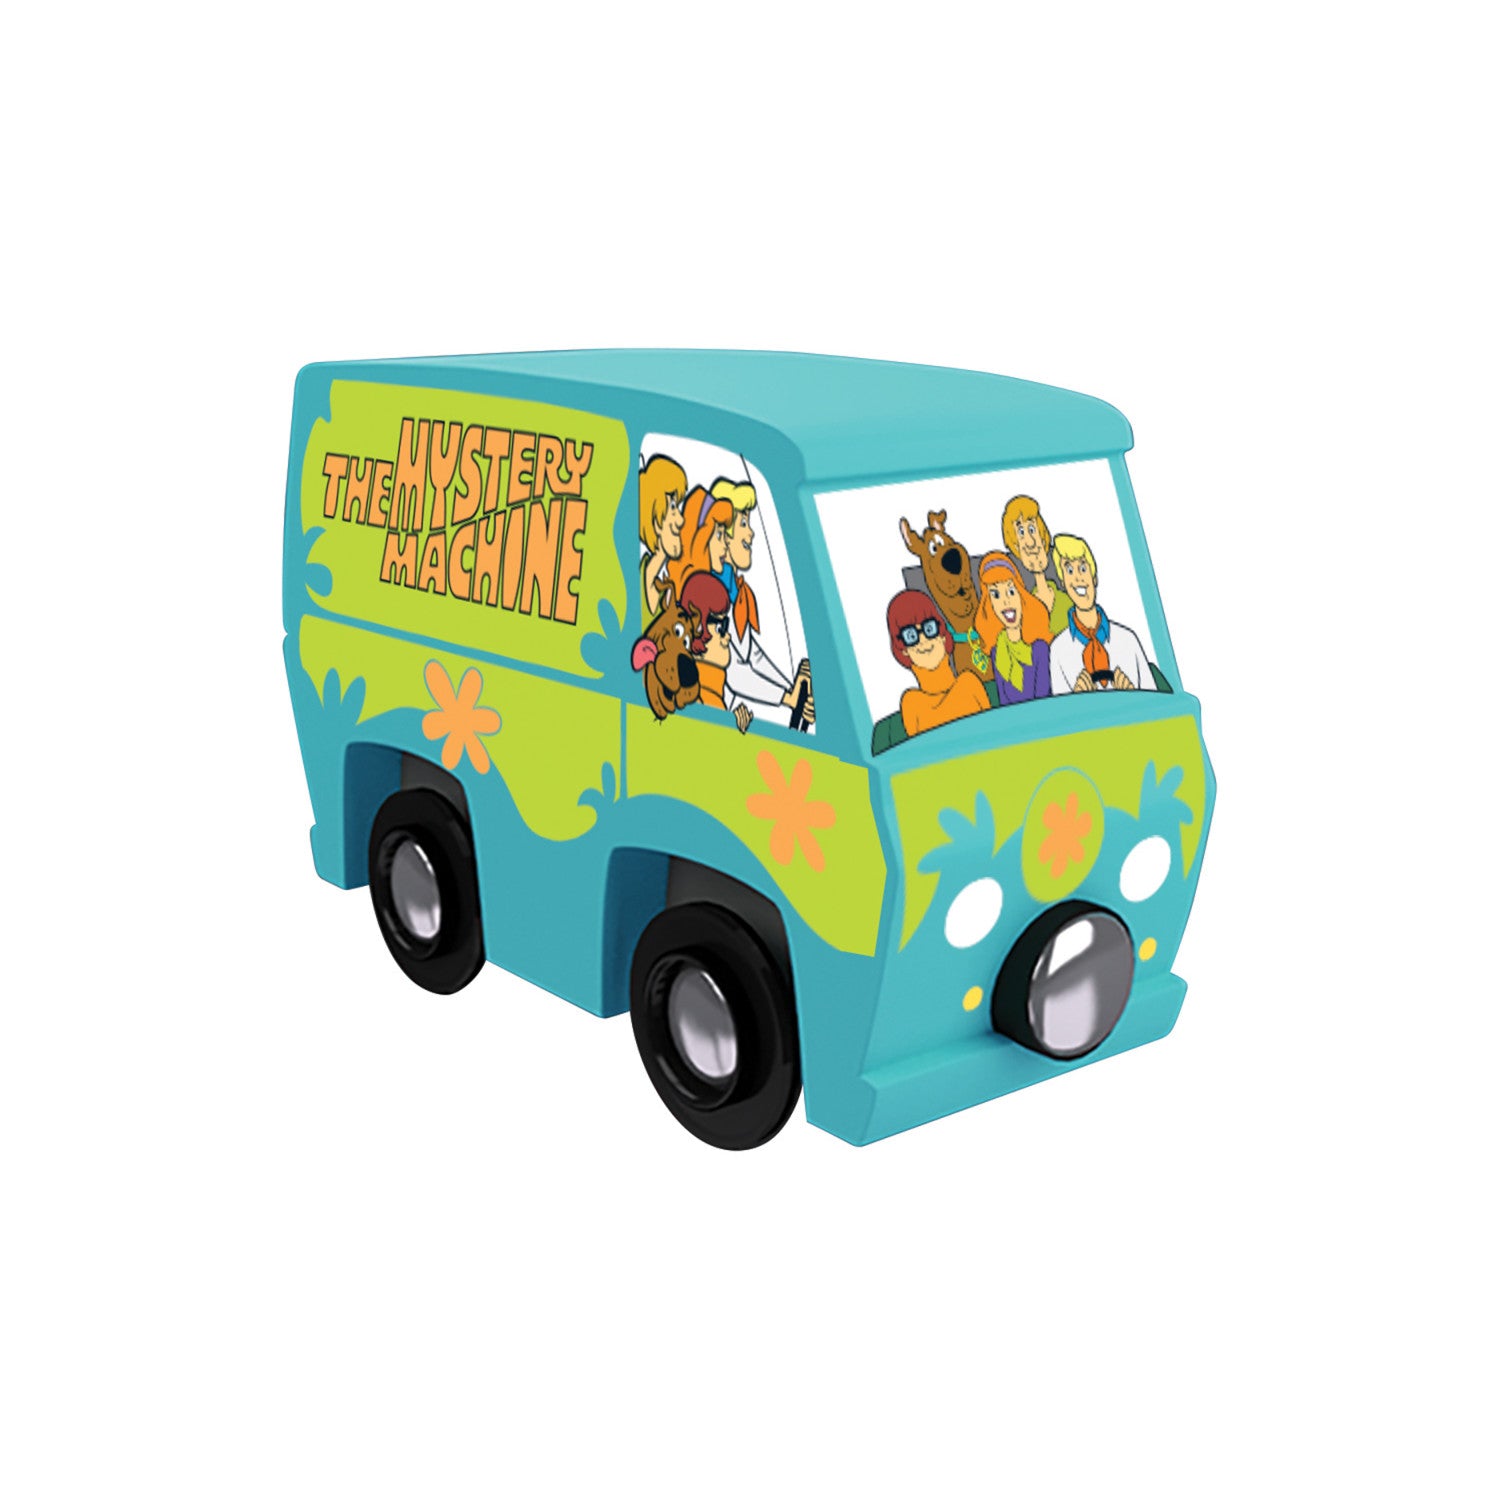 Scooby Doo - Mystery Machine Wood Craft Kit – MasterPieces Puzzle Company  INC